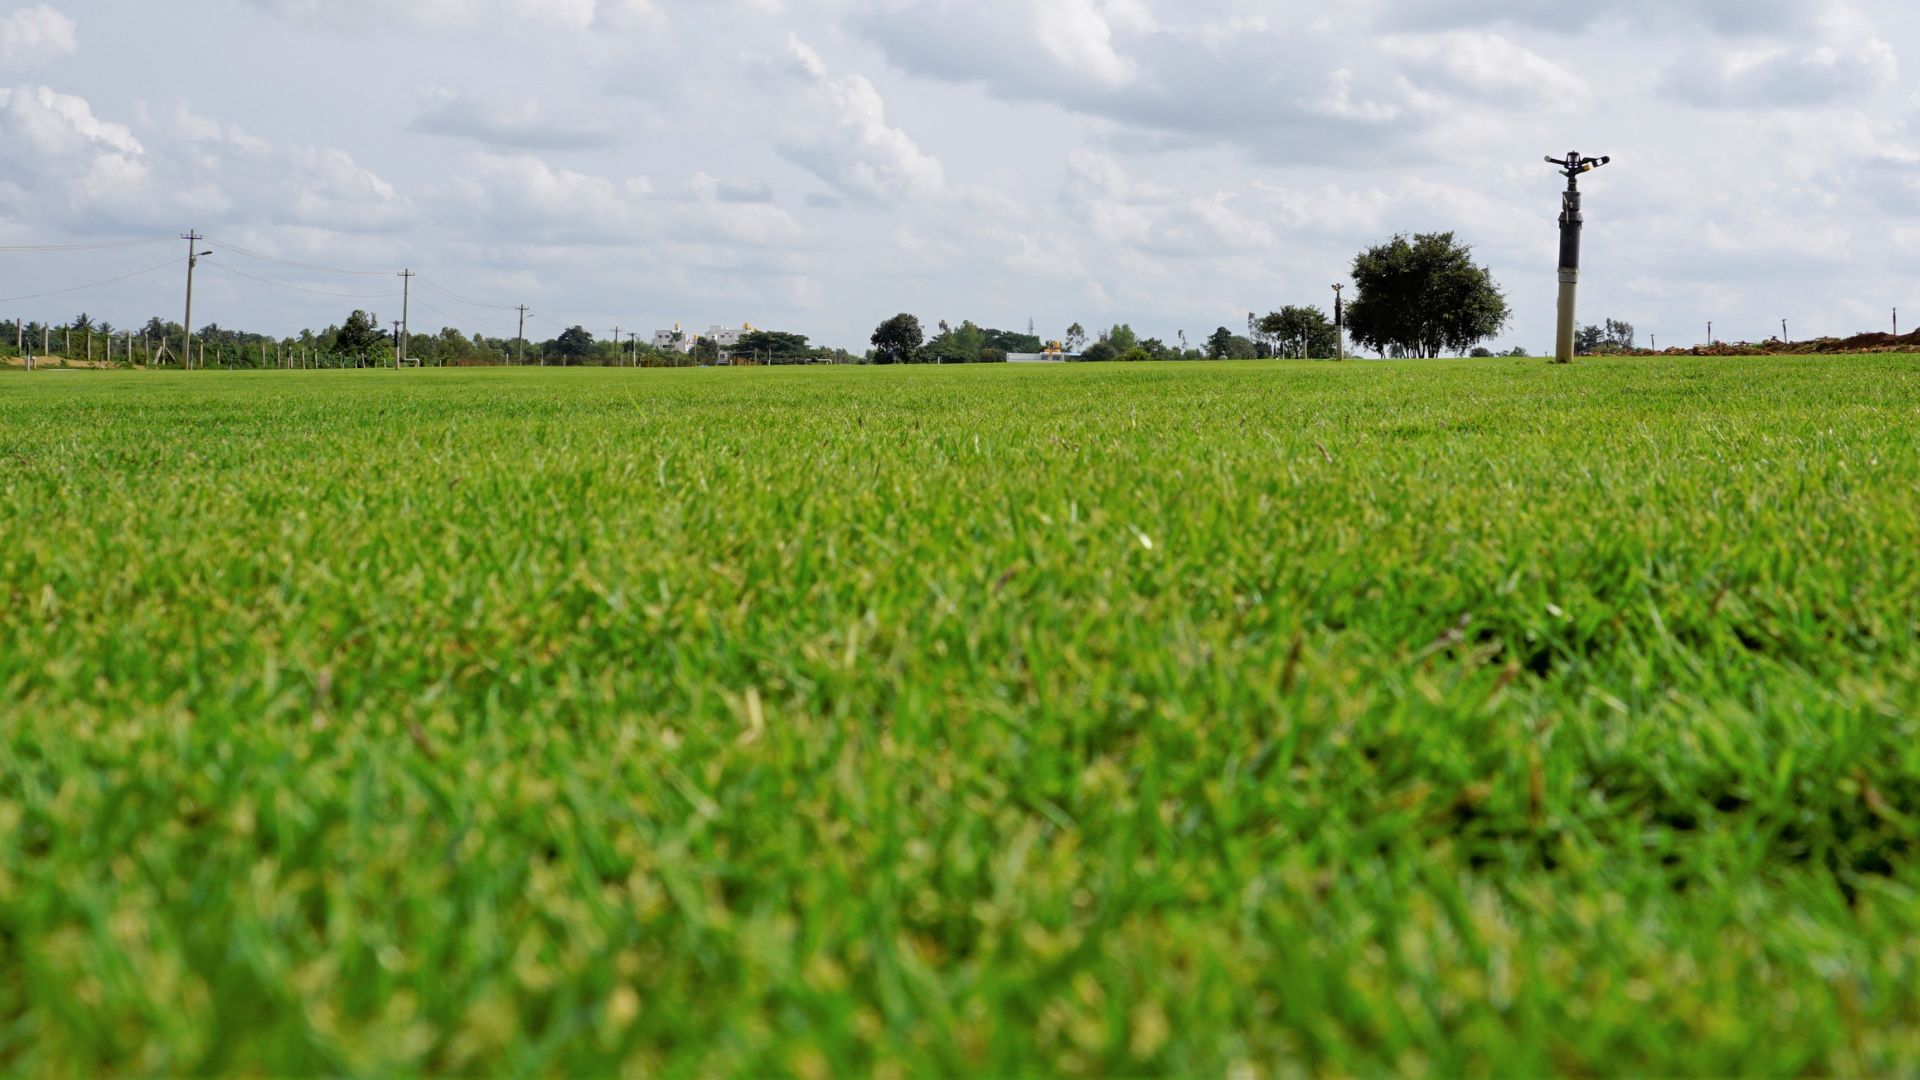 close up of a lawn of green Bermuda grass